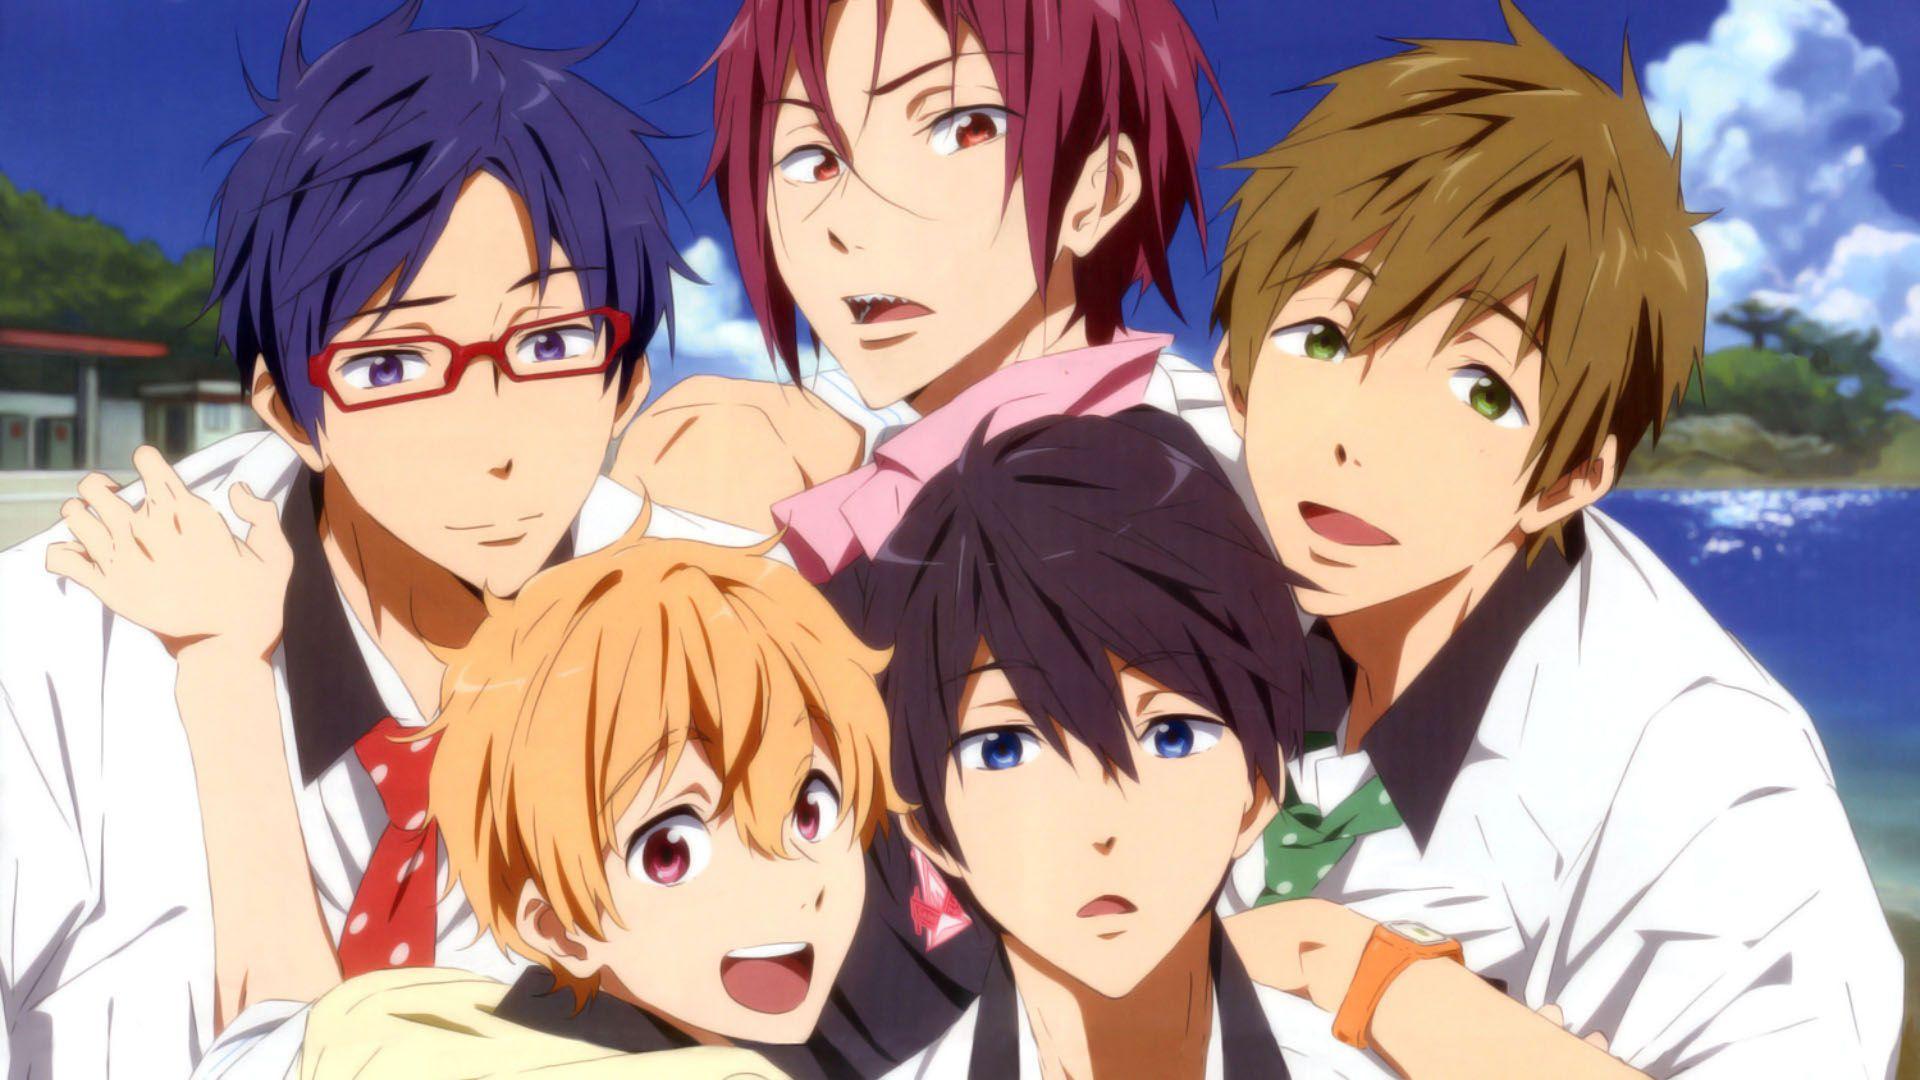 Topic: Free! Wallpaper, Good for your laptop. Honey's Anime